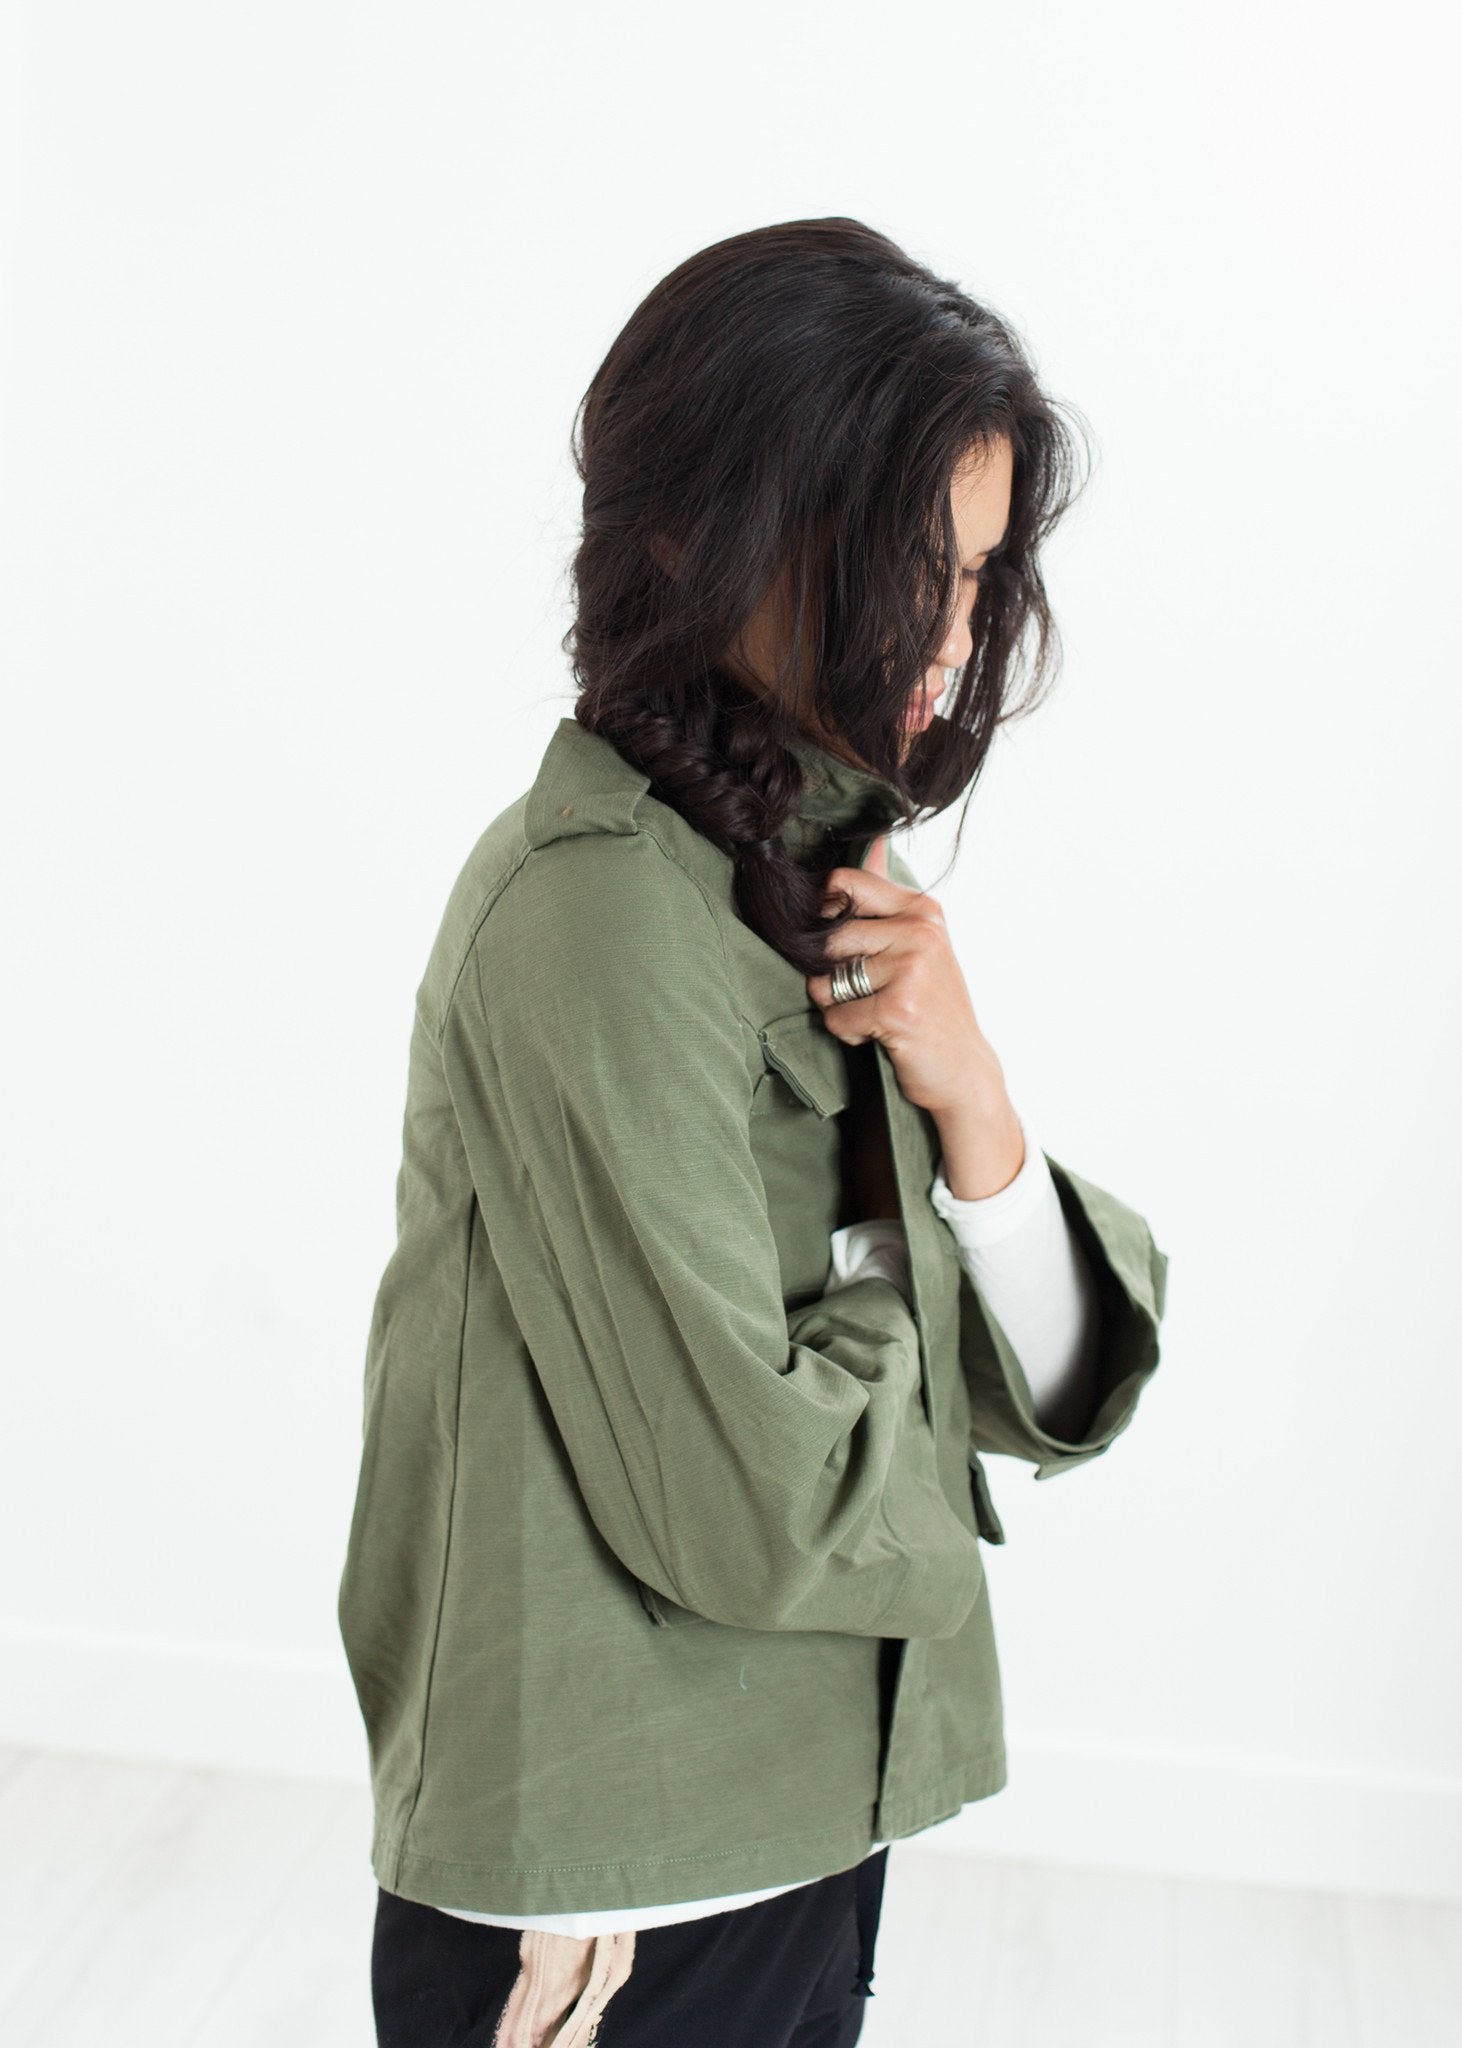 Big Army Jacket in Olive